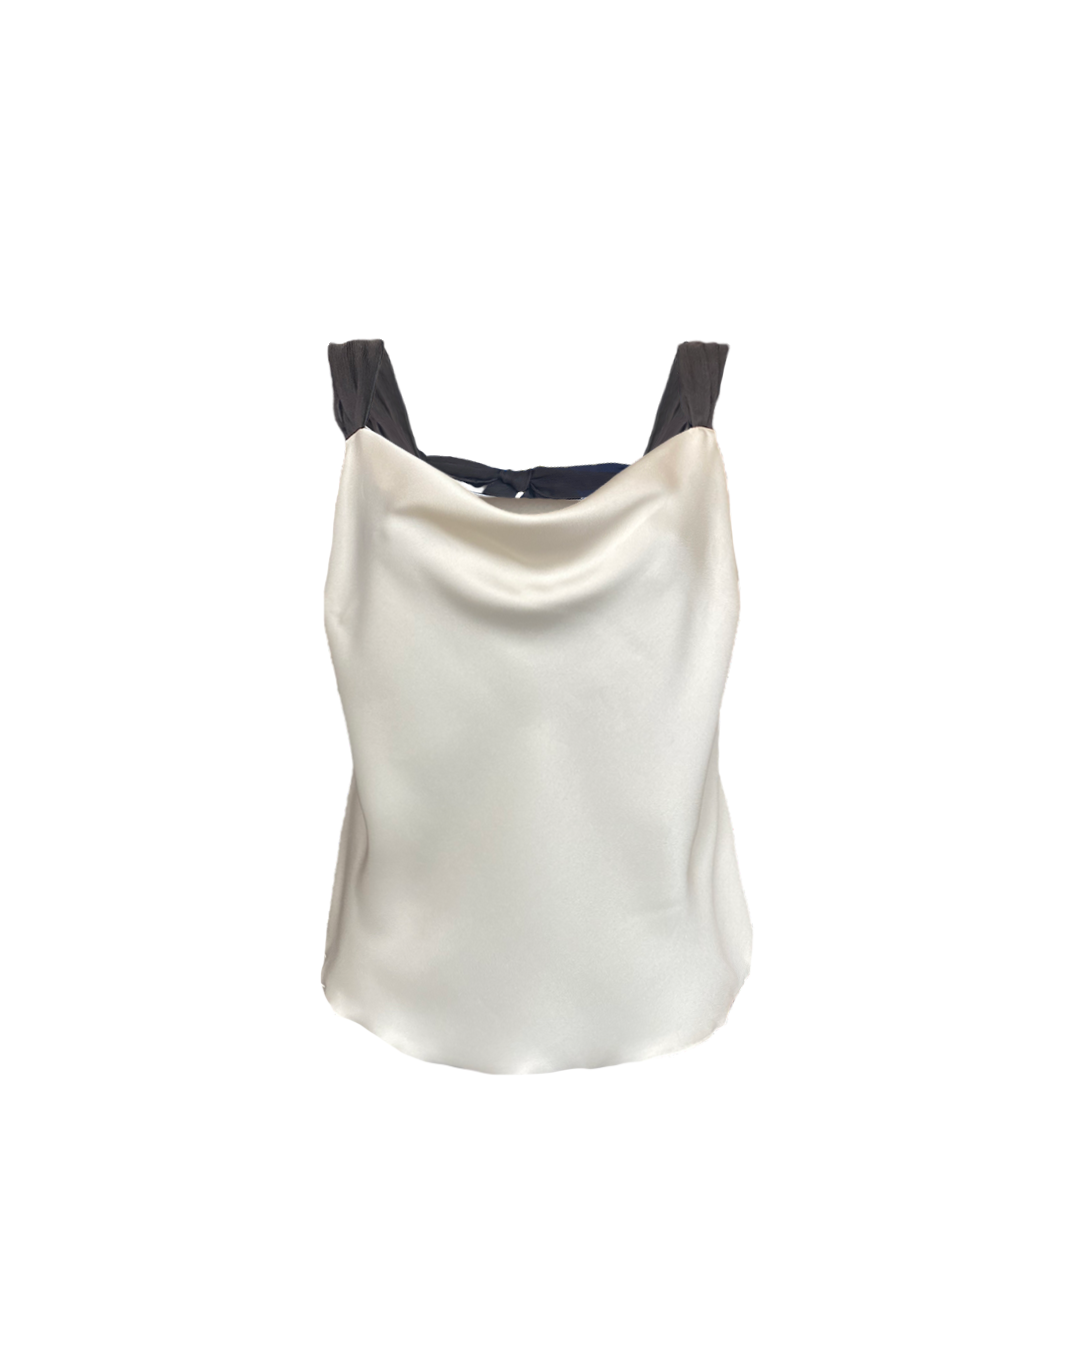 DOUBLE SILK TOP VERONA SS/23 - SOLD OUT